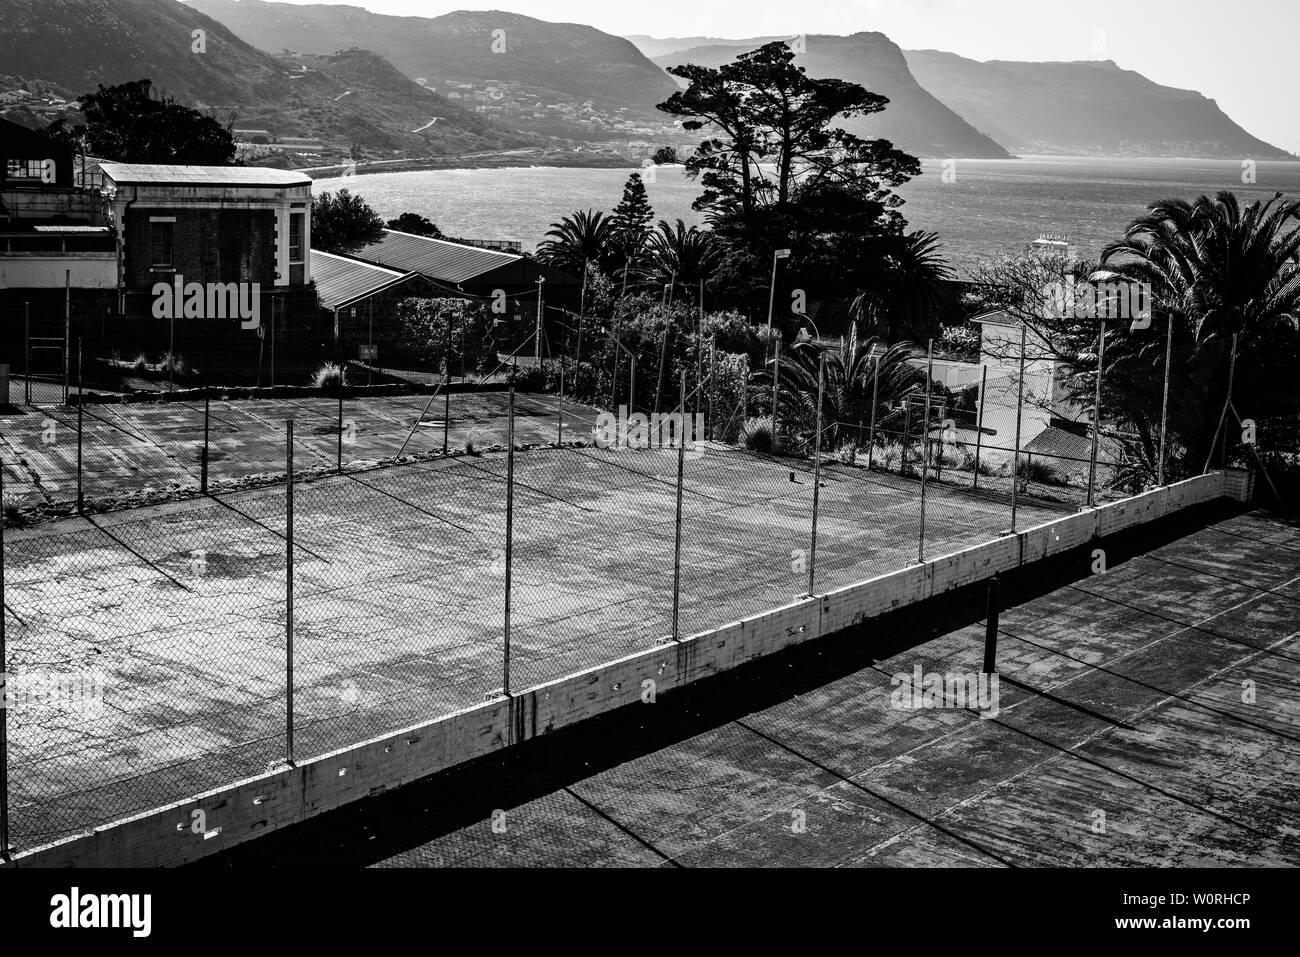 The neglected Simons Town tennis courts on South Africa's False Bay coastline near Cape Town Stock Photo